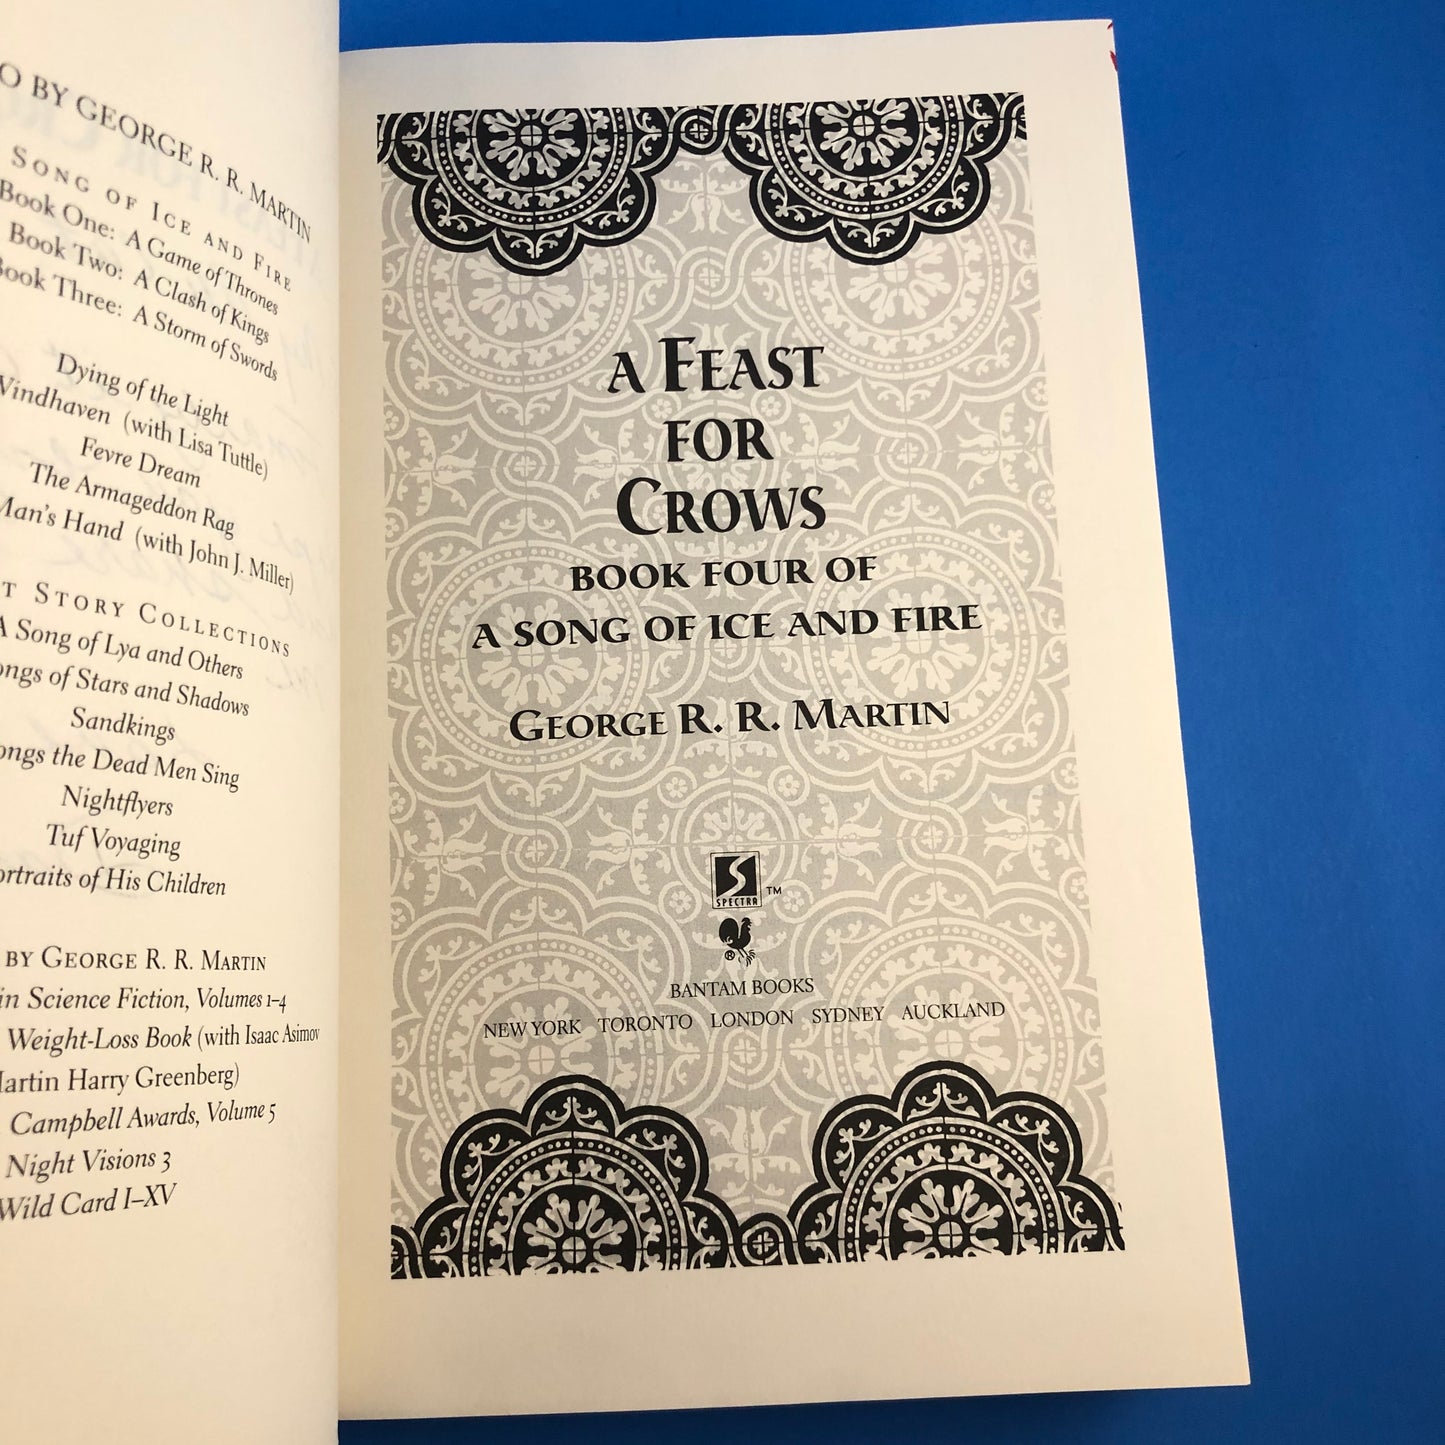 A Feast for Crows (ASOIAF #4)